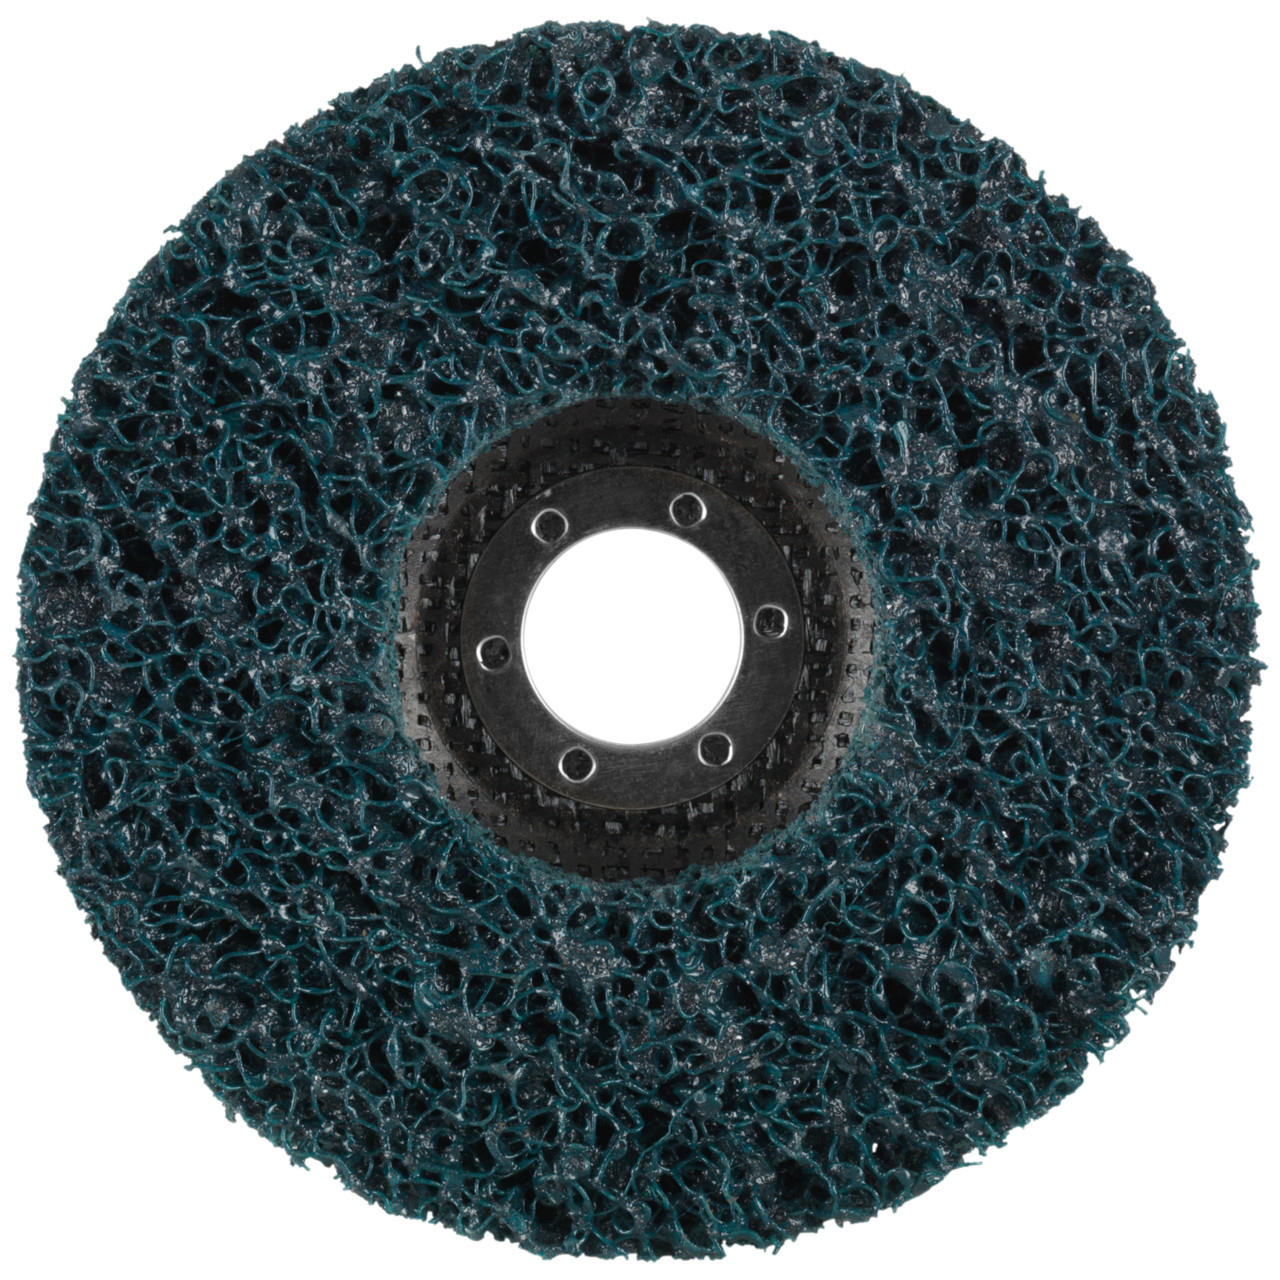 Tyrolit Coarse cleaning disc DxH 125x22.2 Universally applicable, A EX. GROB, shape: 28, Art. 34547536 (Old no. 34206237)